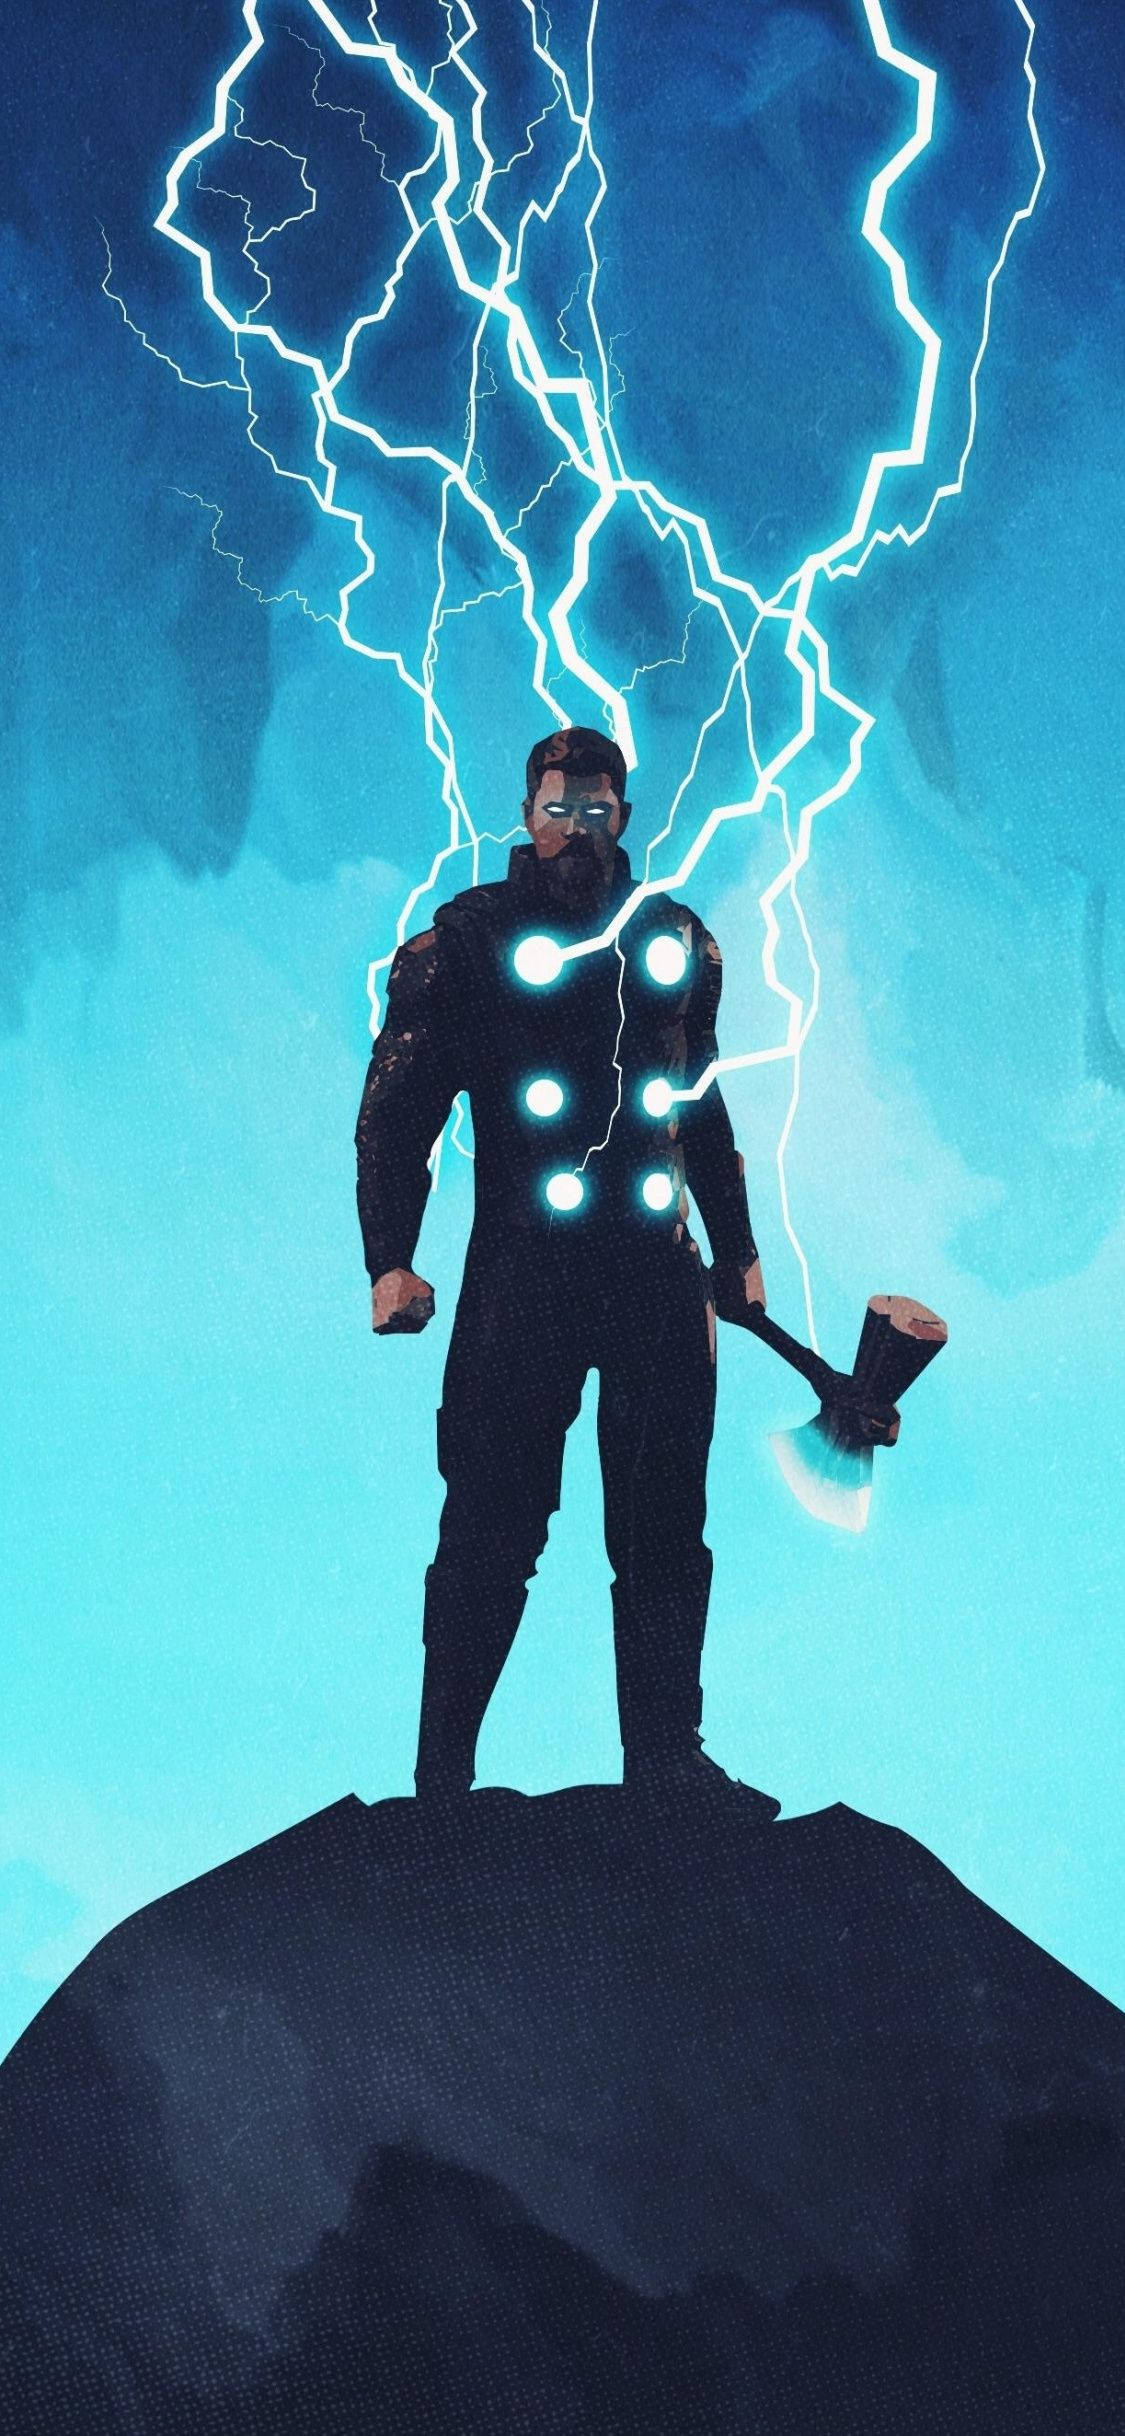 Thor with his hammer standing on a hill with lightning behind him - Thor